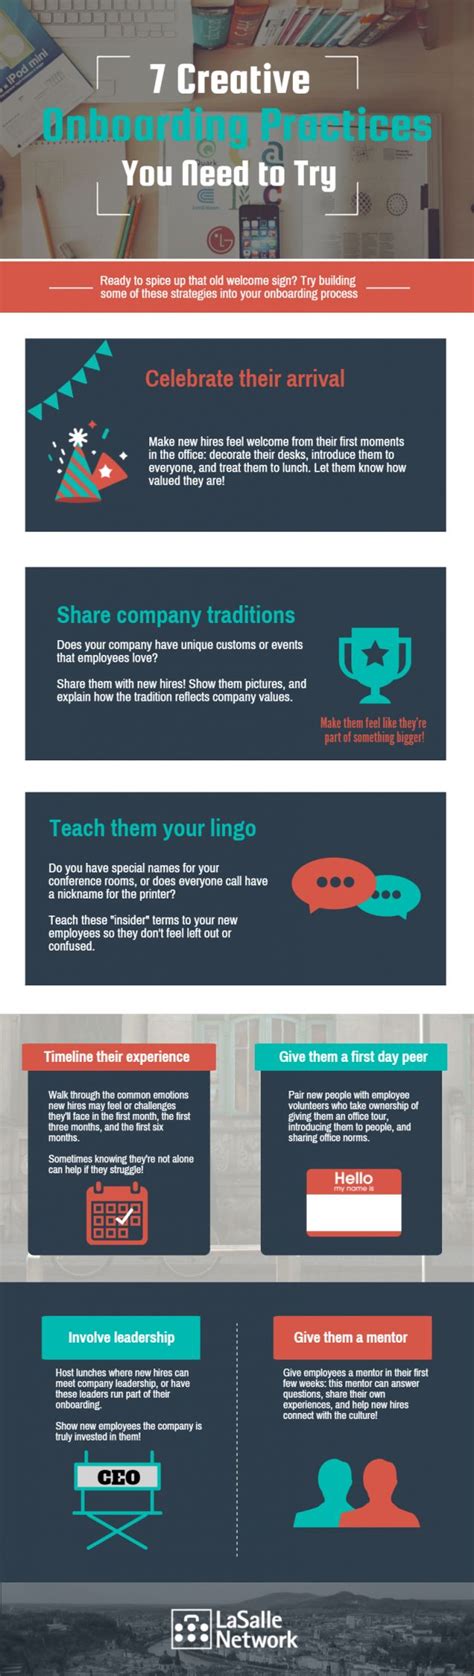 creative onboarding practices     infographic